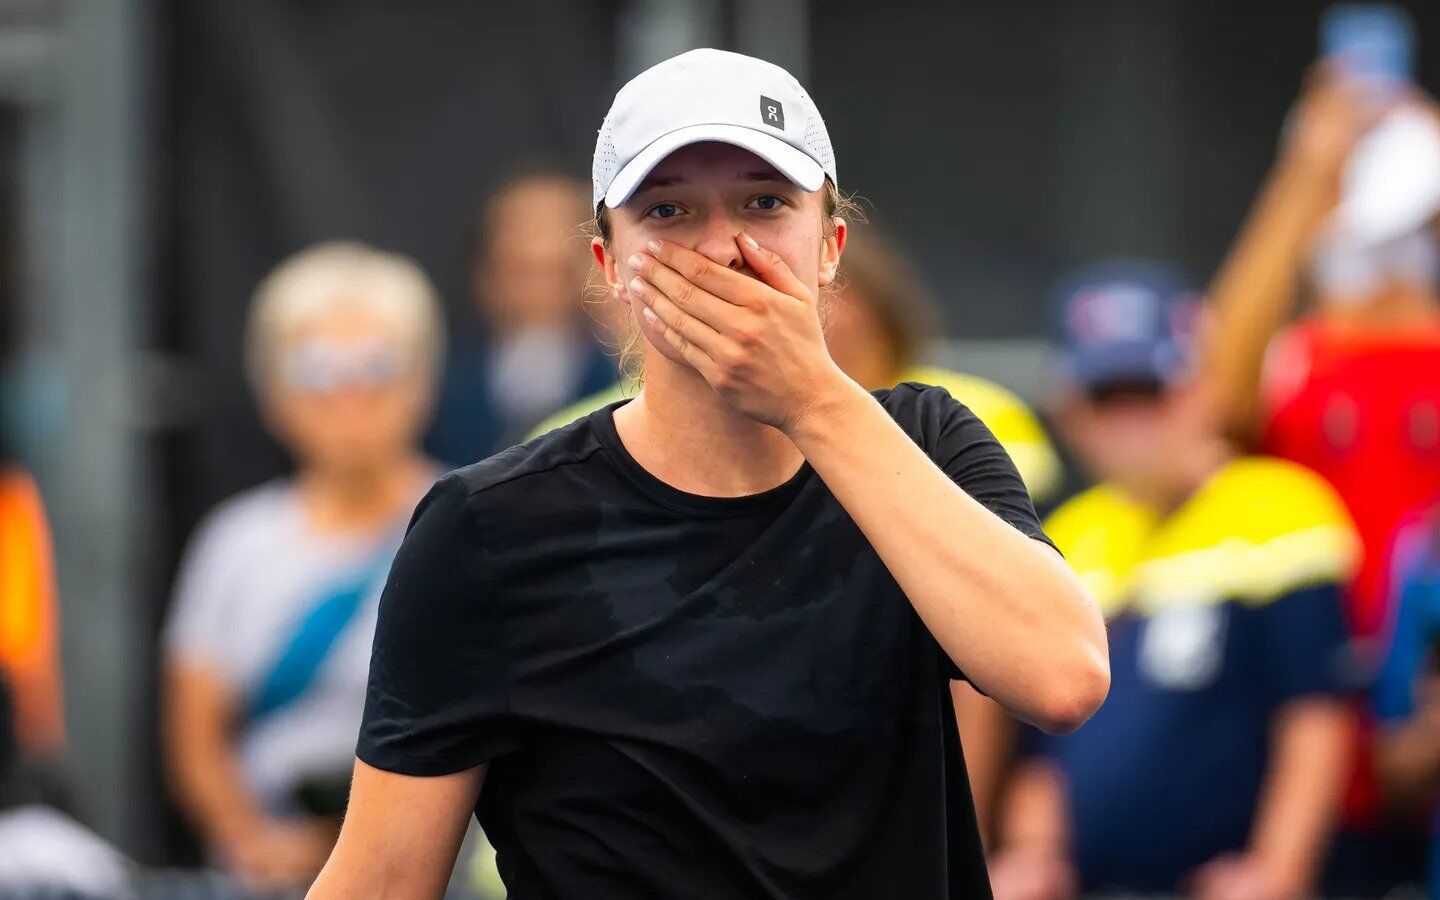 The best tennis player in the world entered the court with her mouth taped and explained why. Photo fact